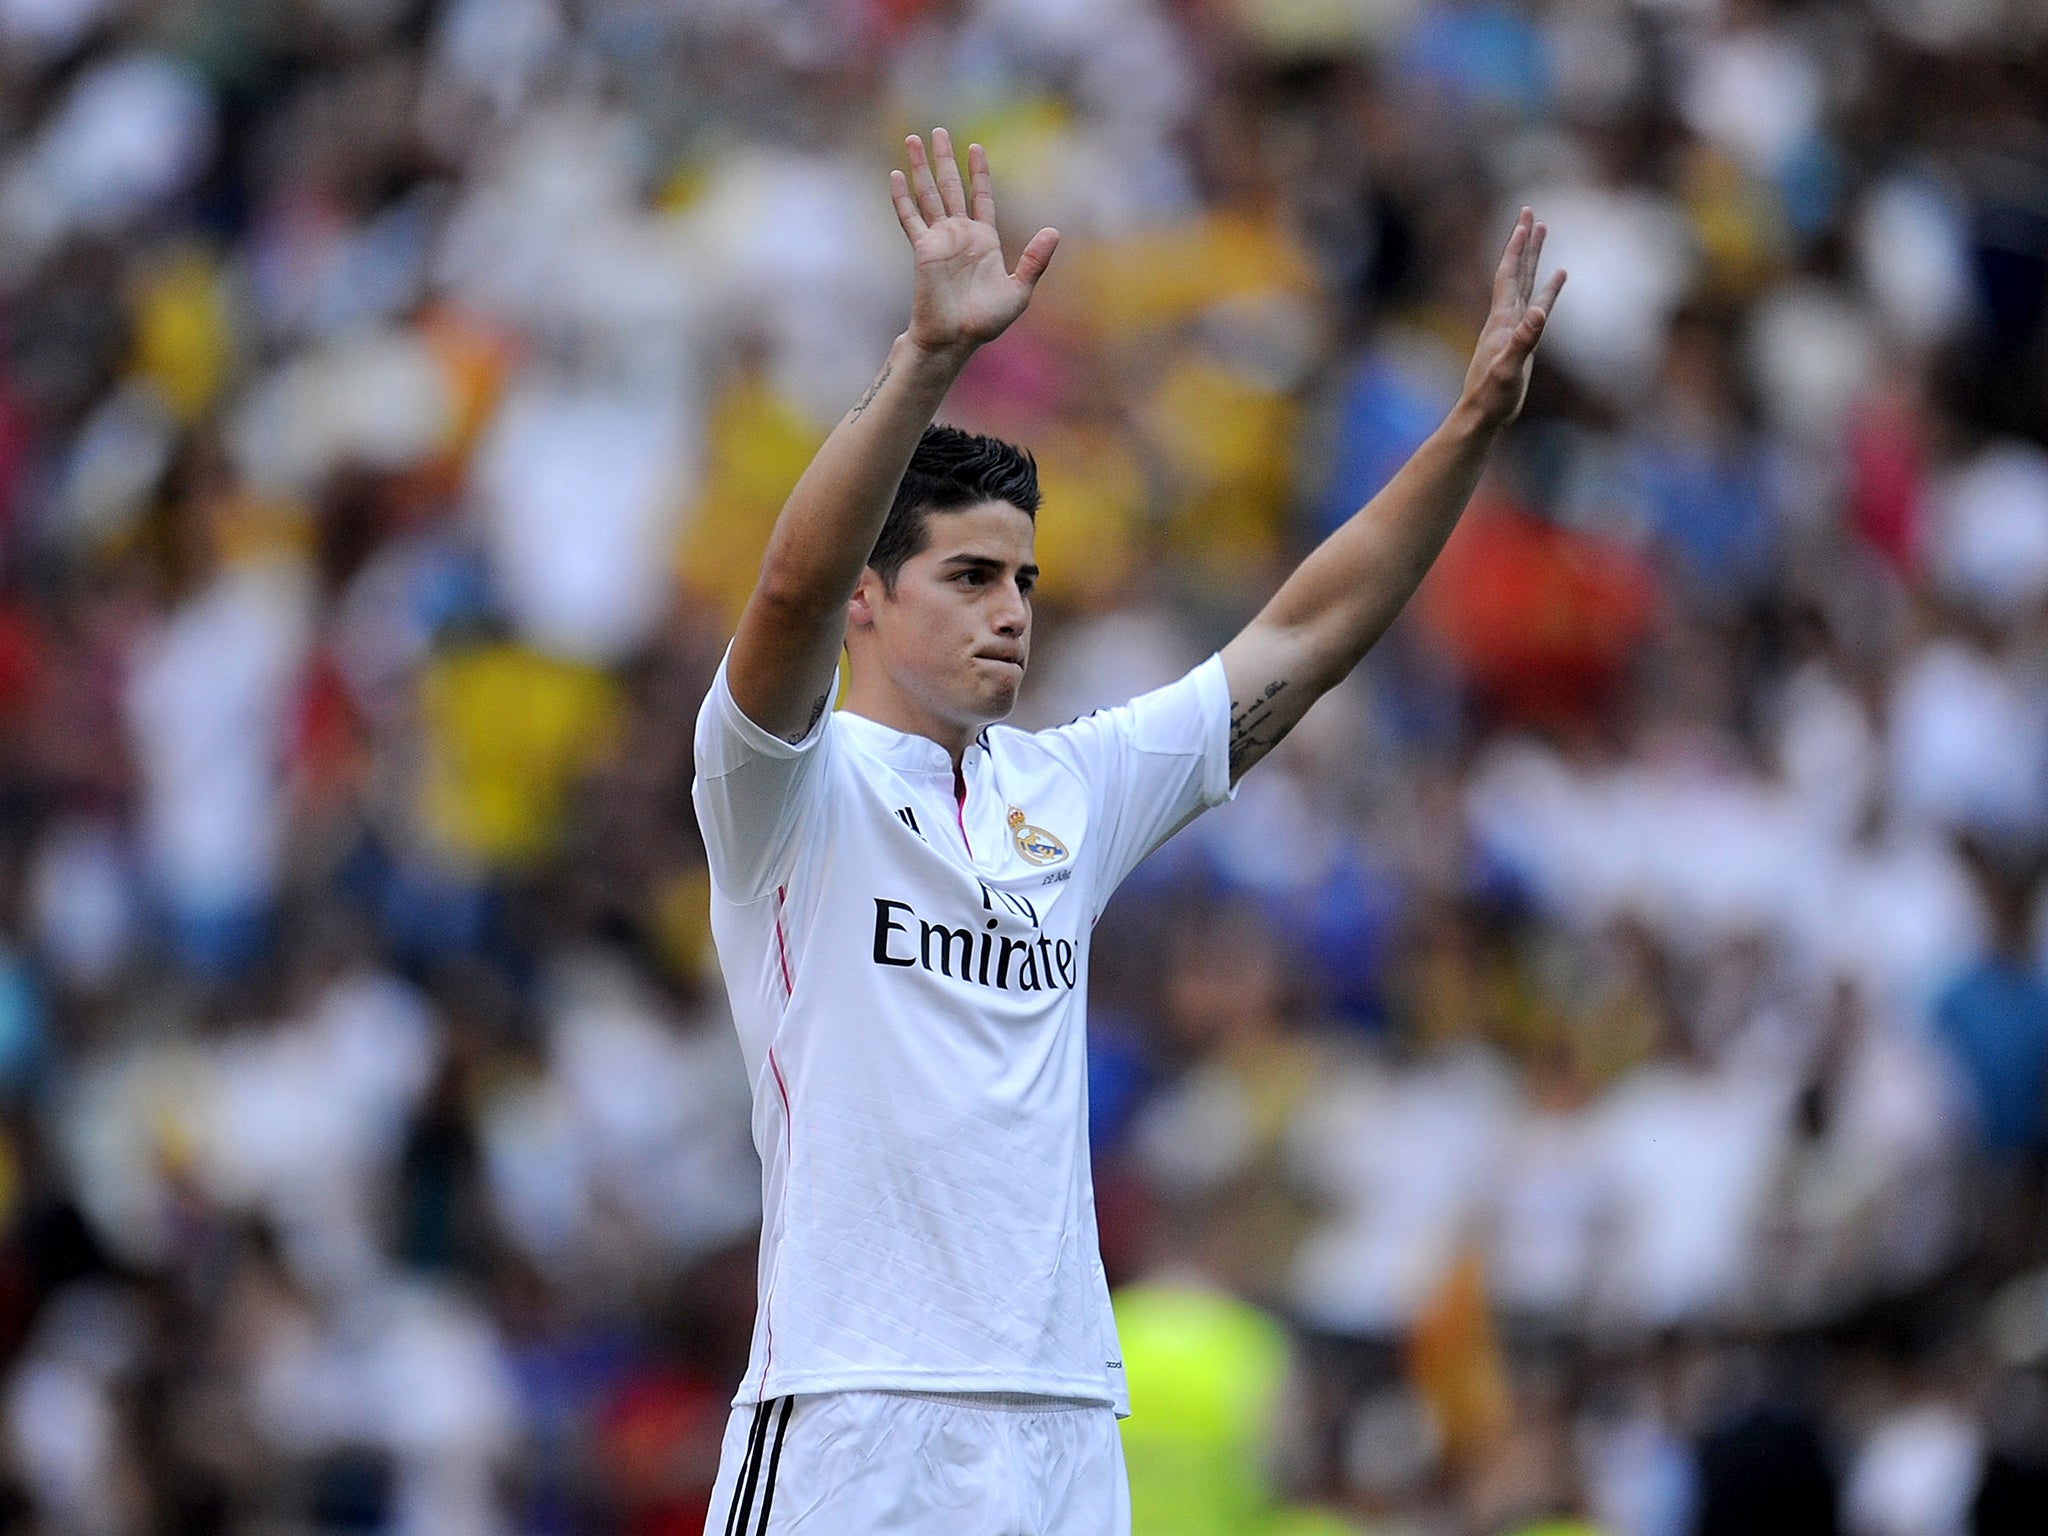 James Rodriguez is unveiled in front of the Real Madrid fans